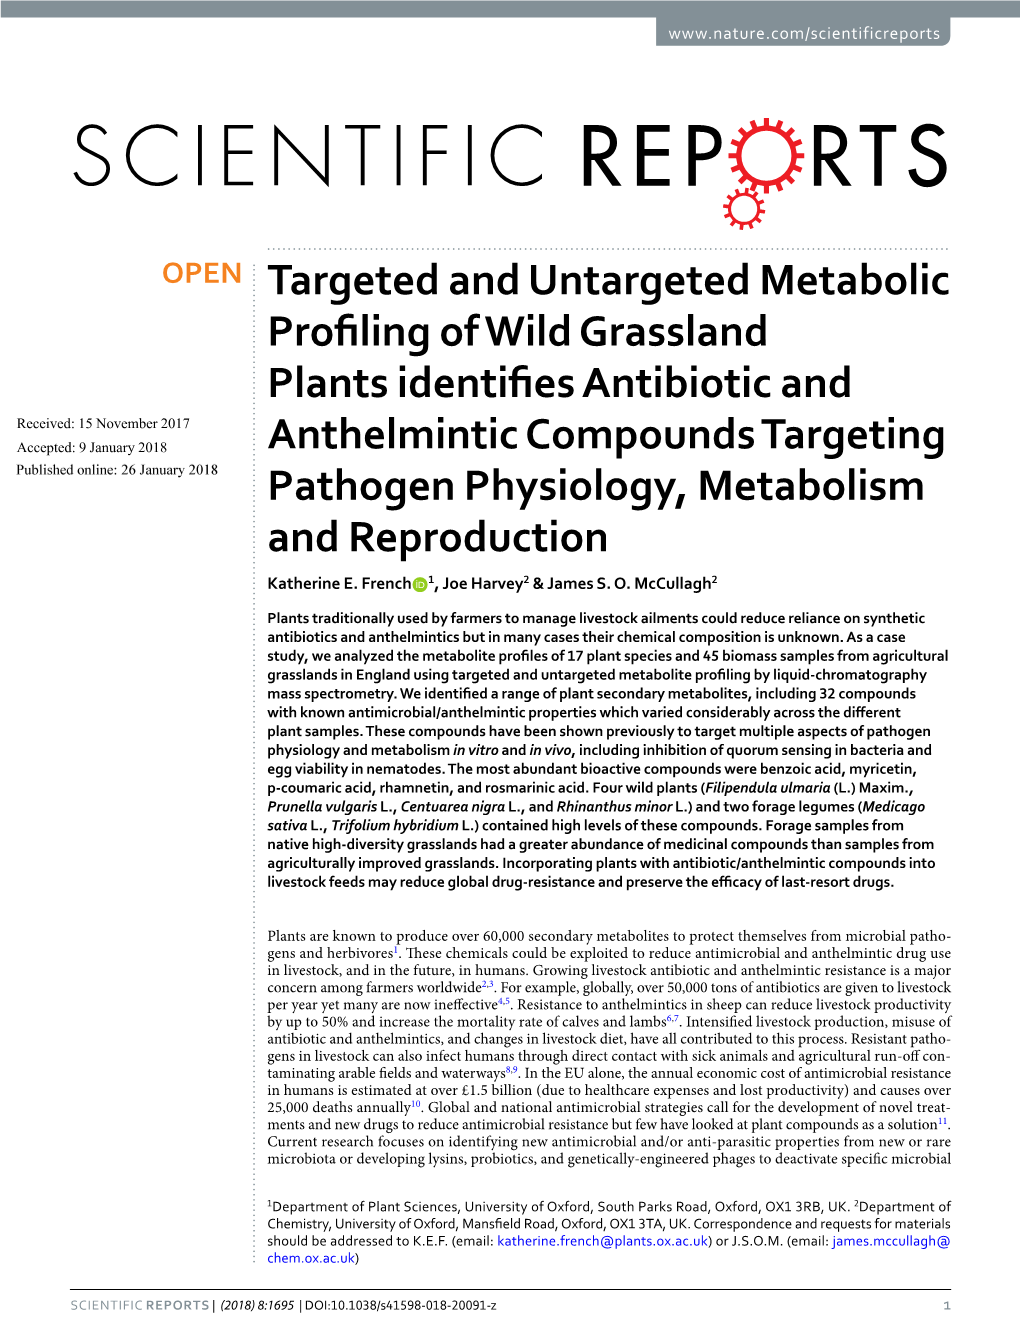 Targeted and Untargeted Metabolic Profiling of Wild Grassland Plants